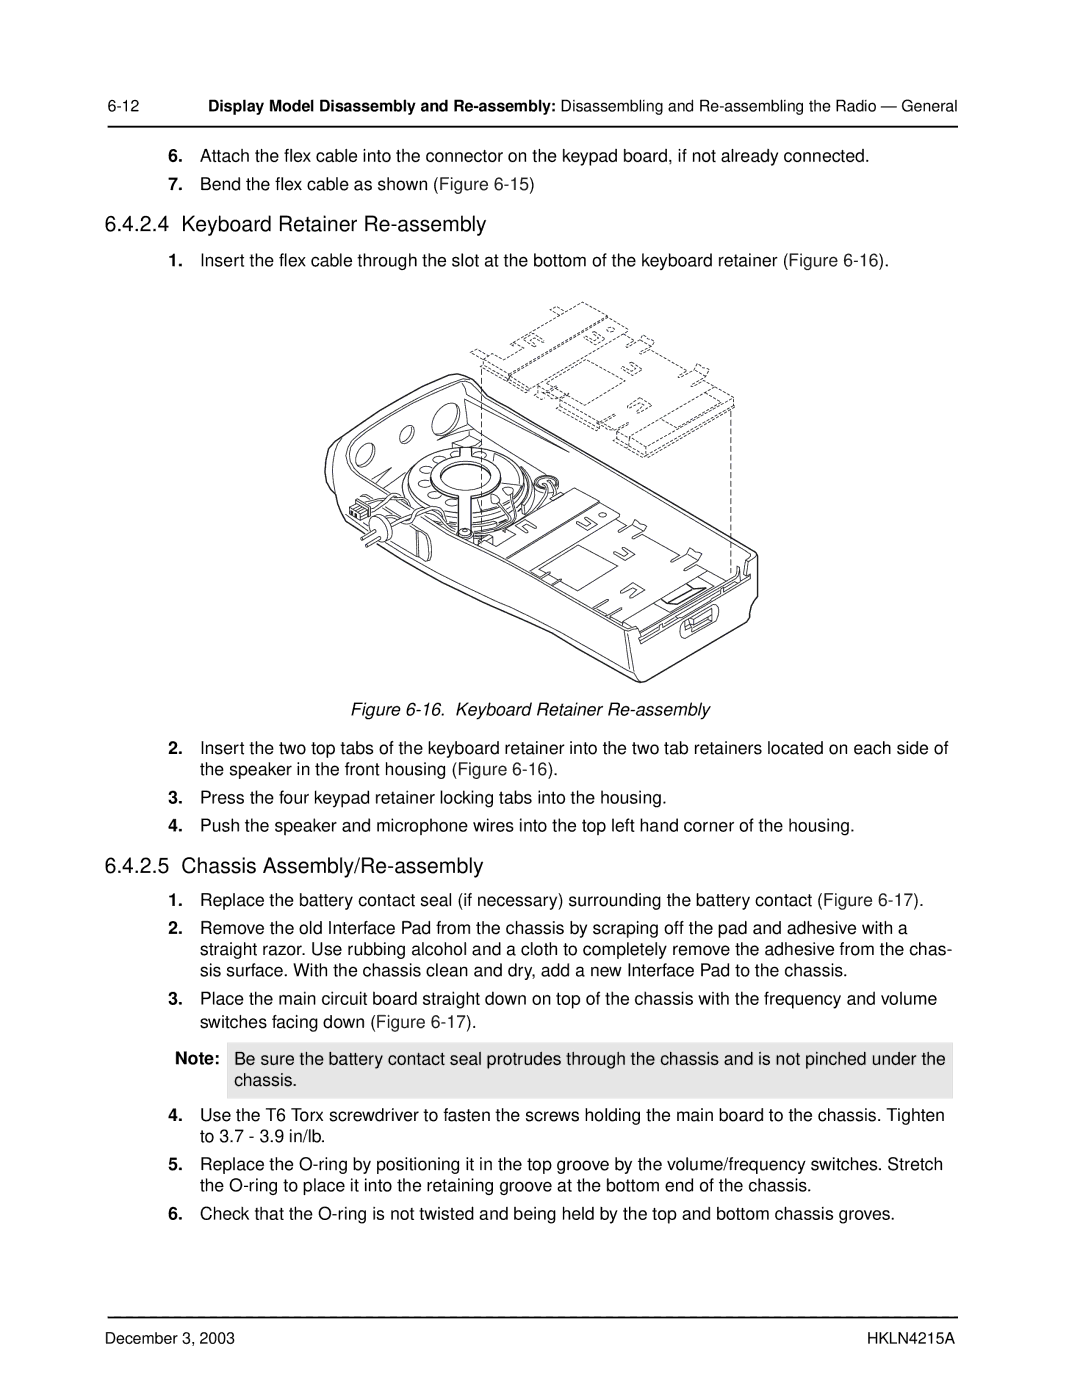 Motorola EP450 service manual Keyboard Retainer Re-assembly, Chassis Assembly/Re-assembly 